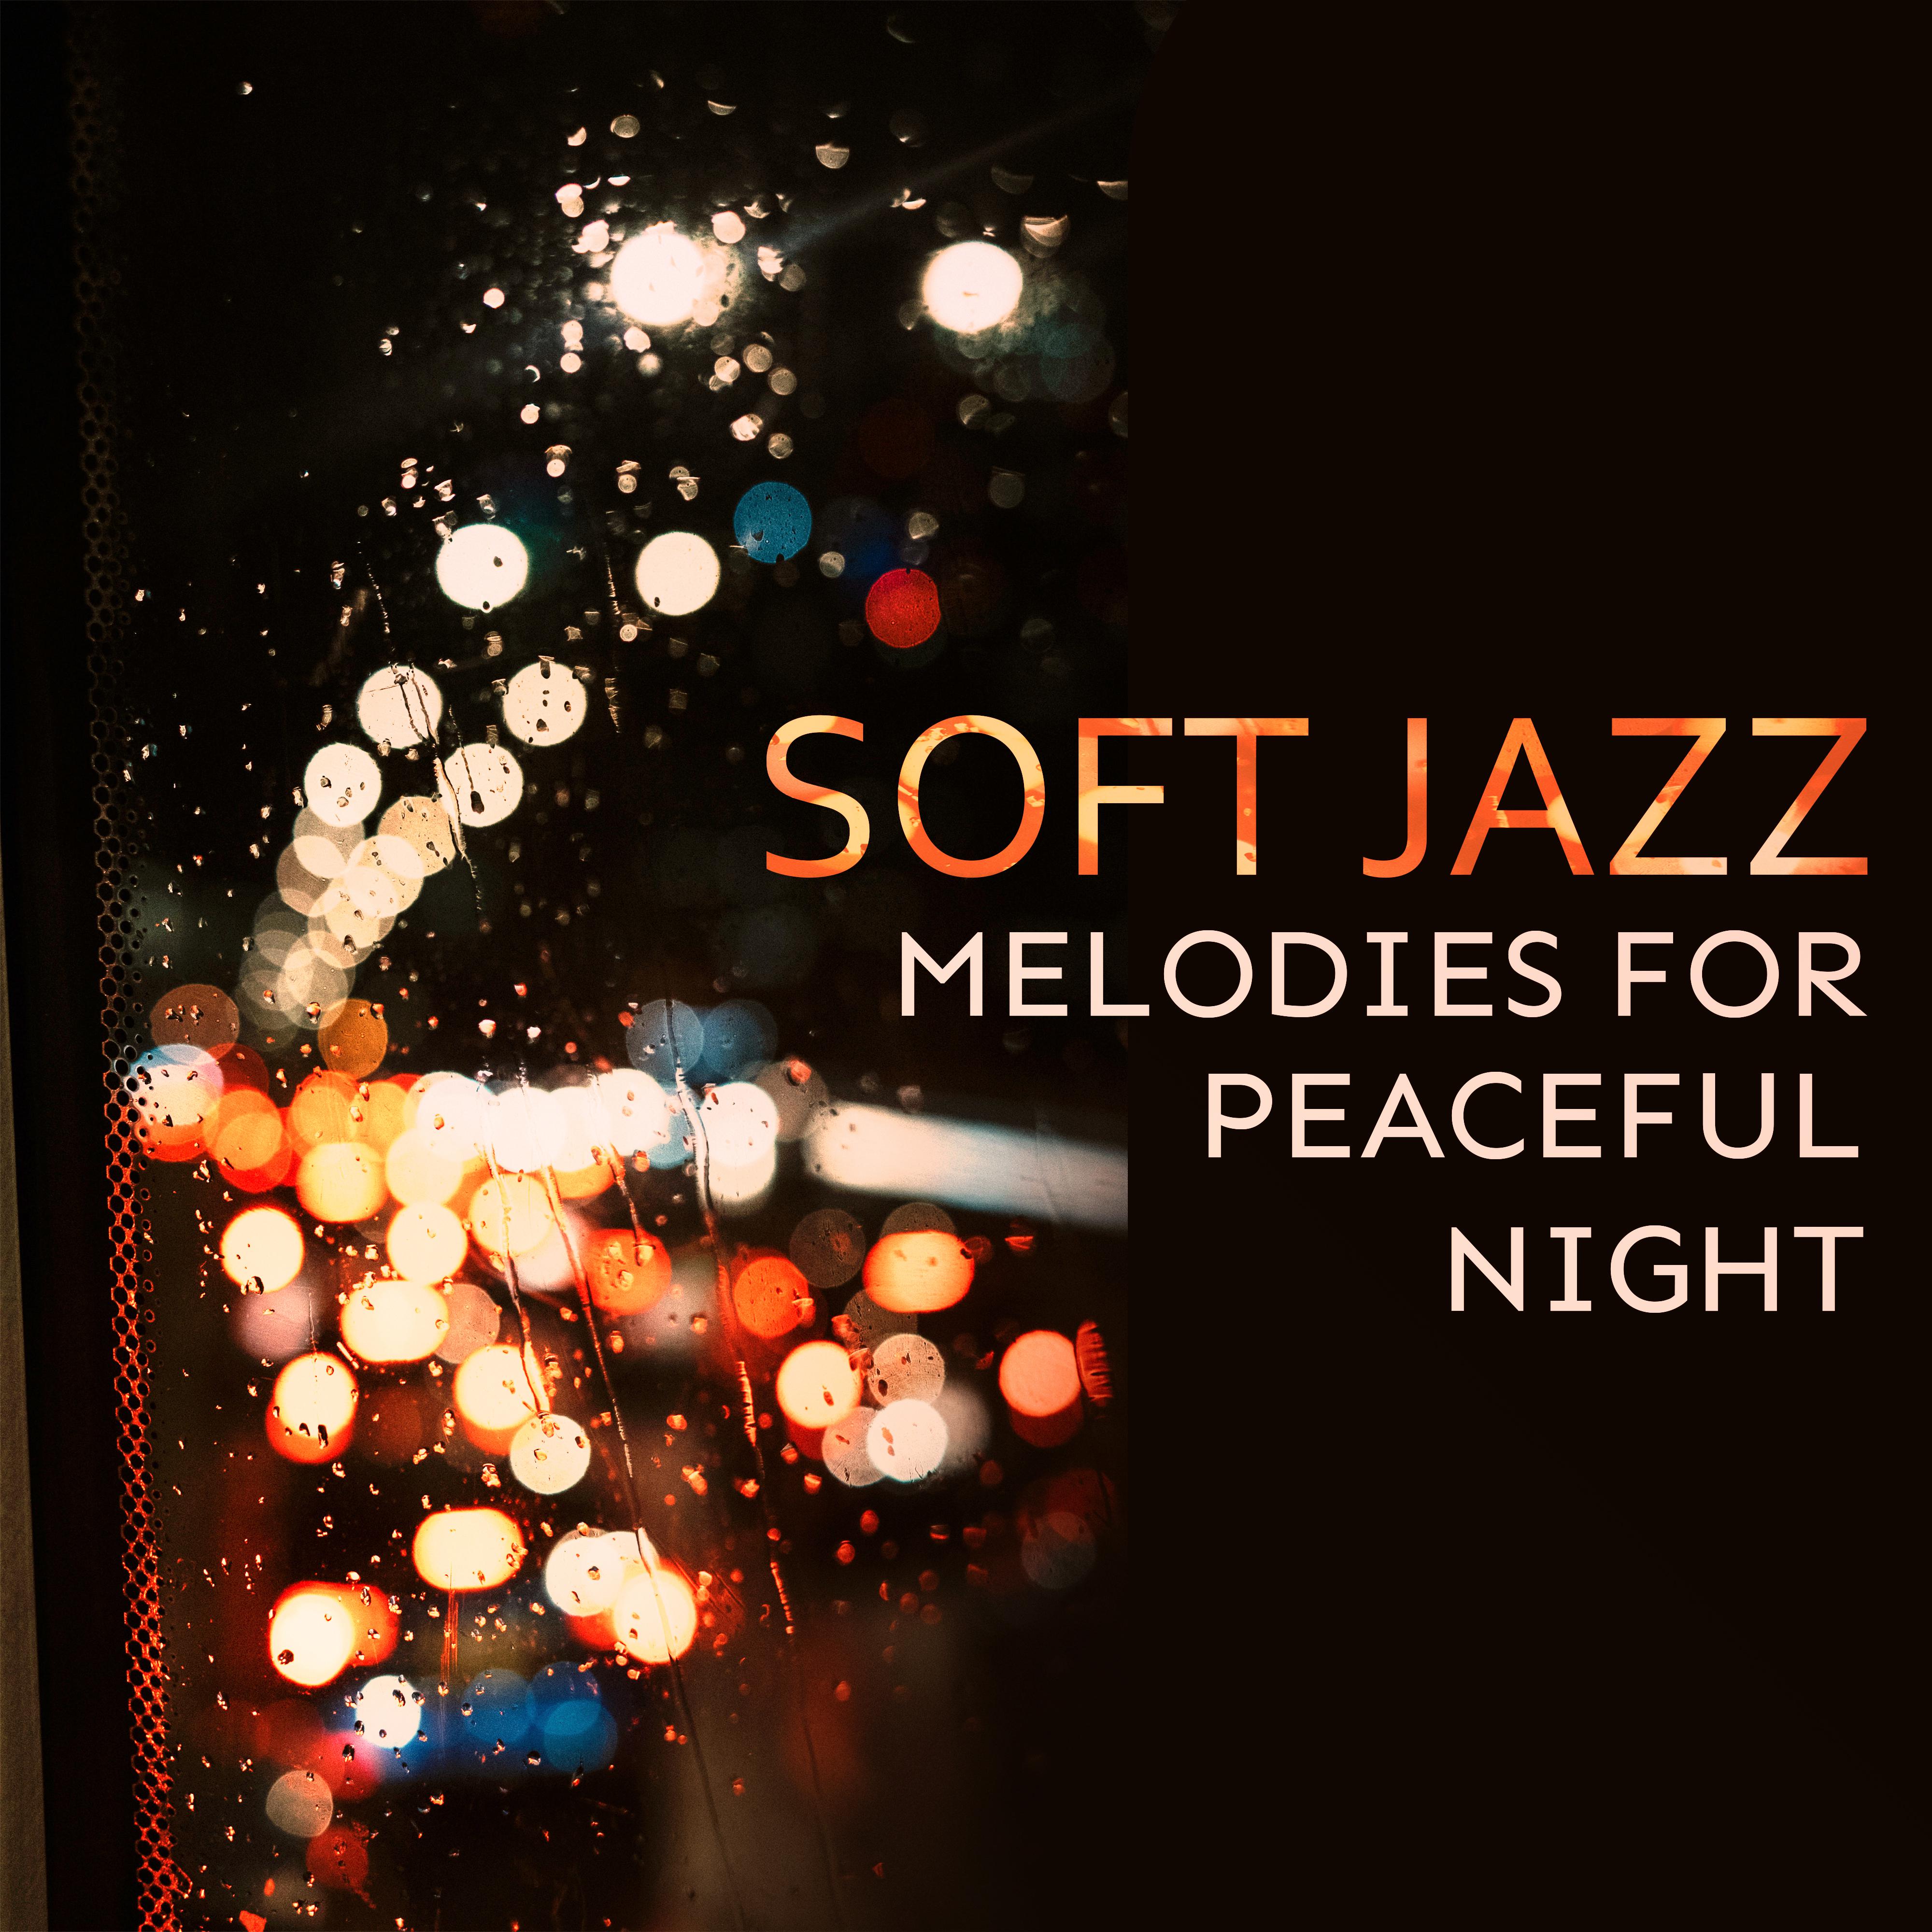 Soft Jazz Melodies for Peaceful Night